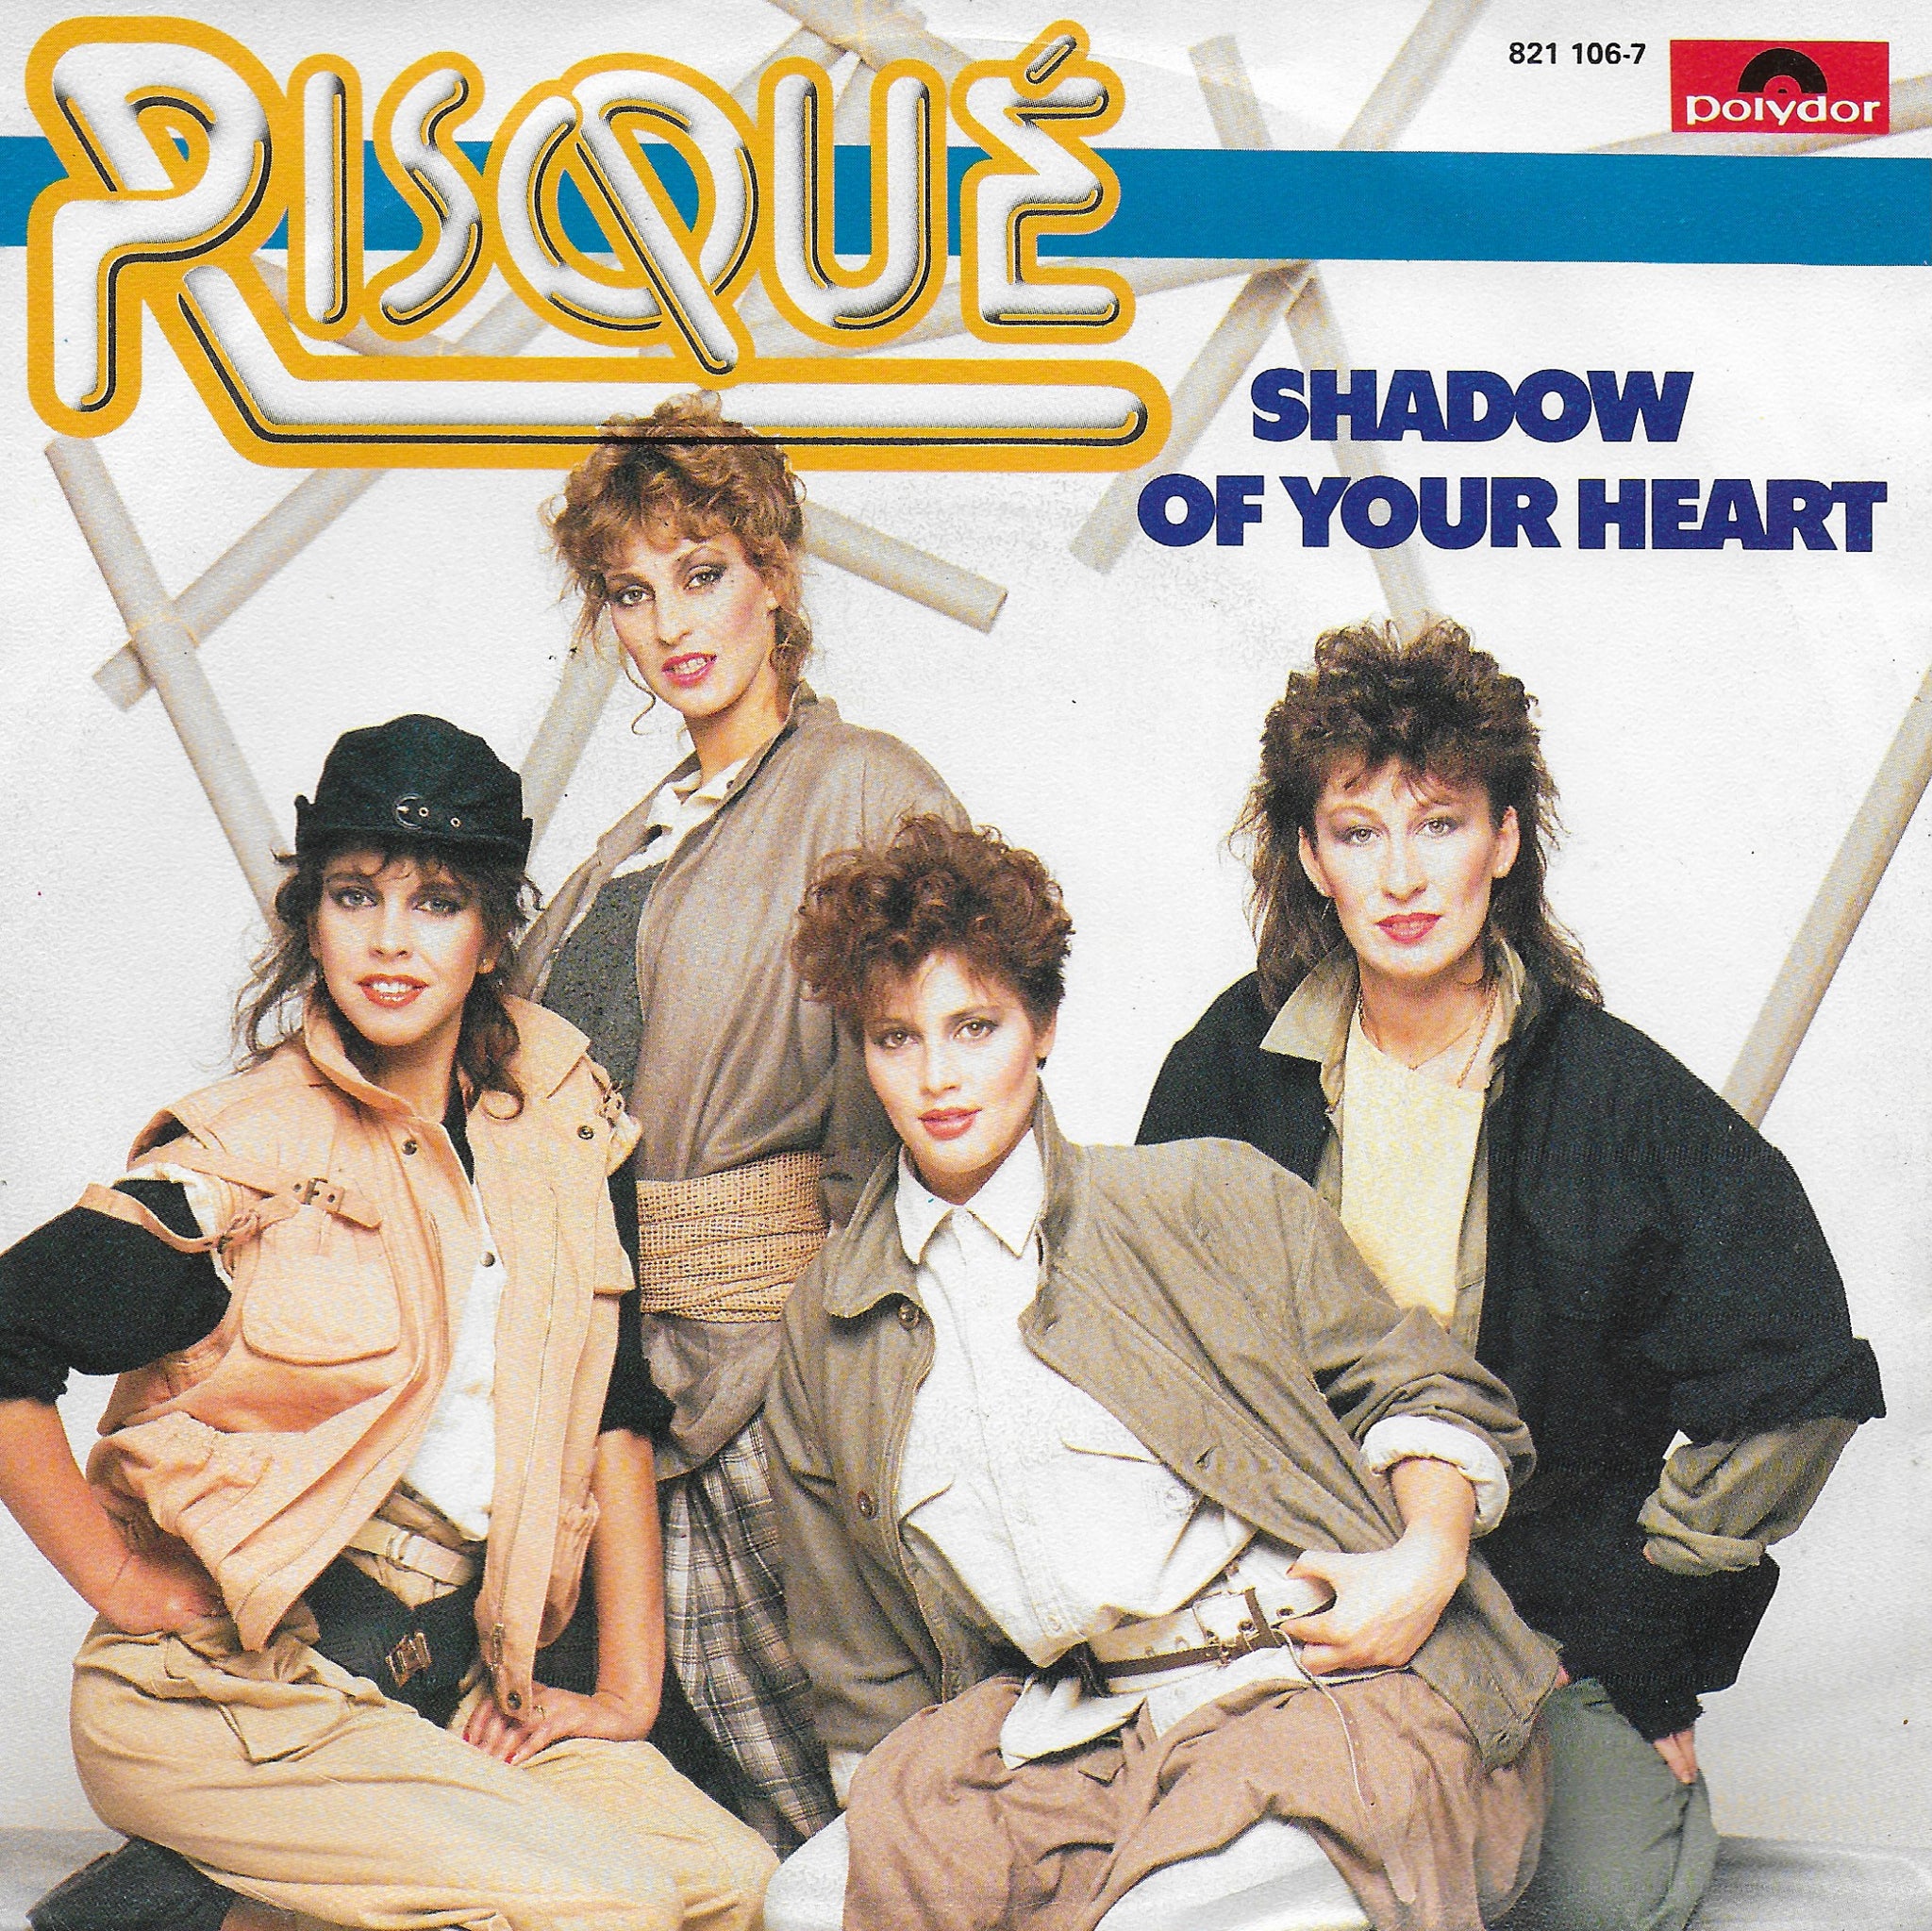 Risqué - Shadow of your heart